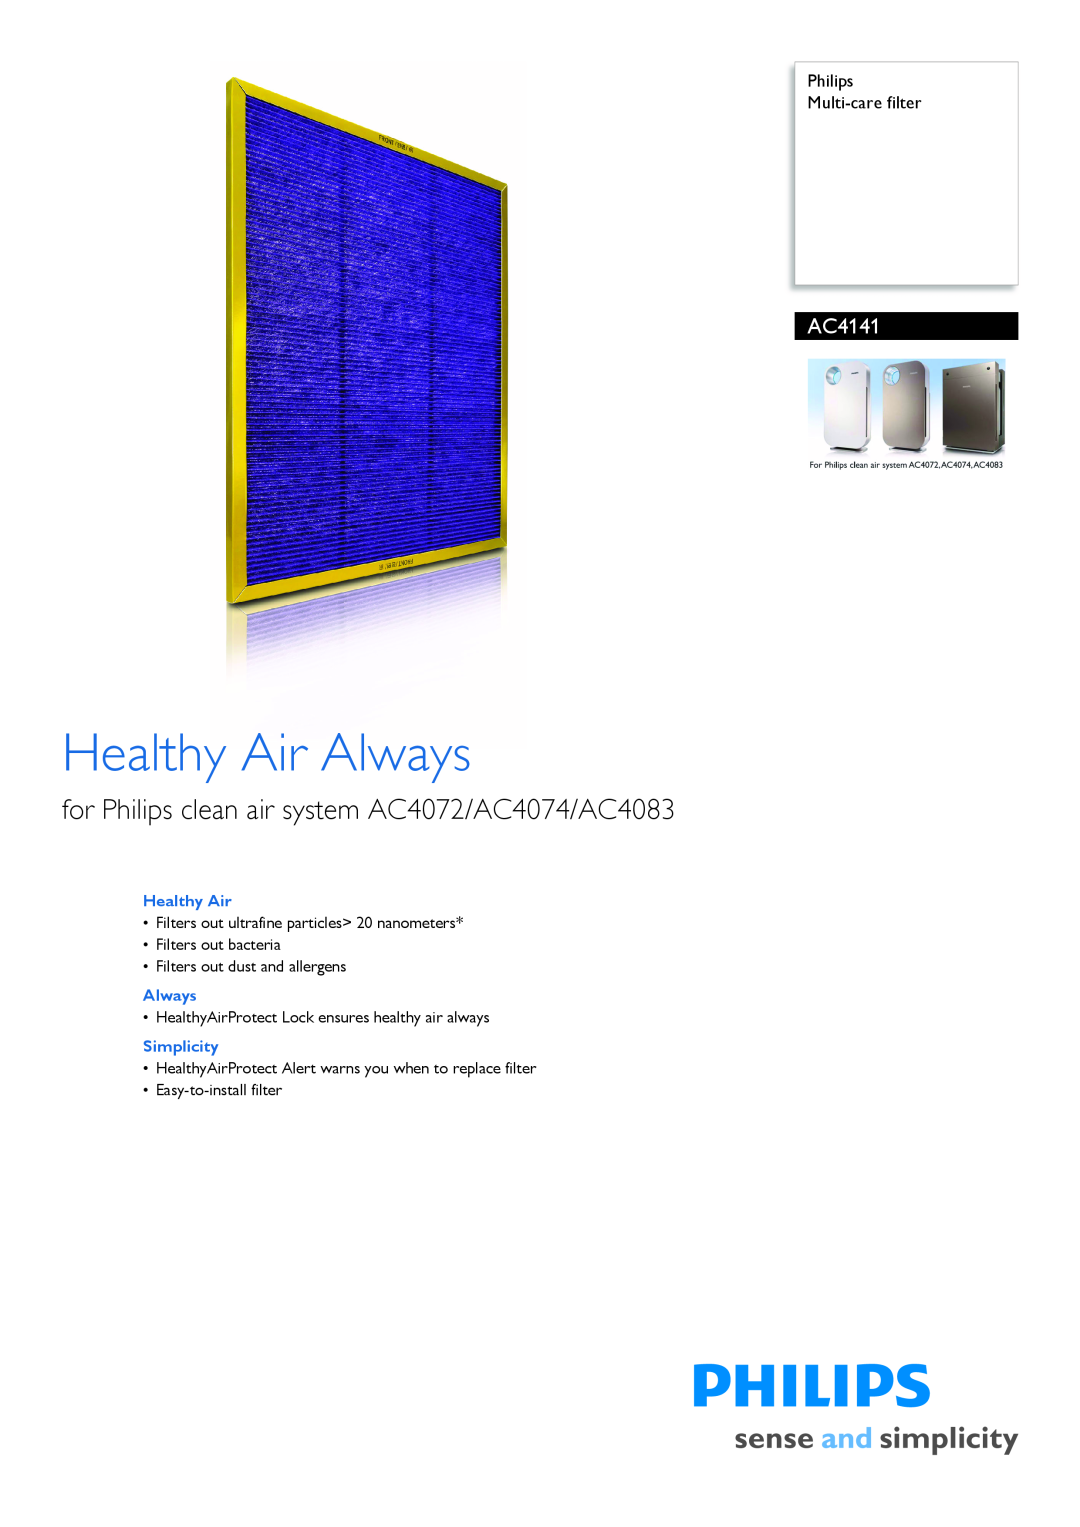 Philips AC4141 manual Philips Multi-carefilter, Simplicity, Healthy Air Always, Filters out bacteria 